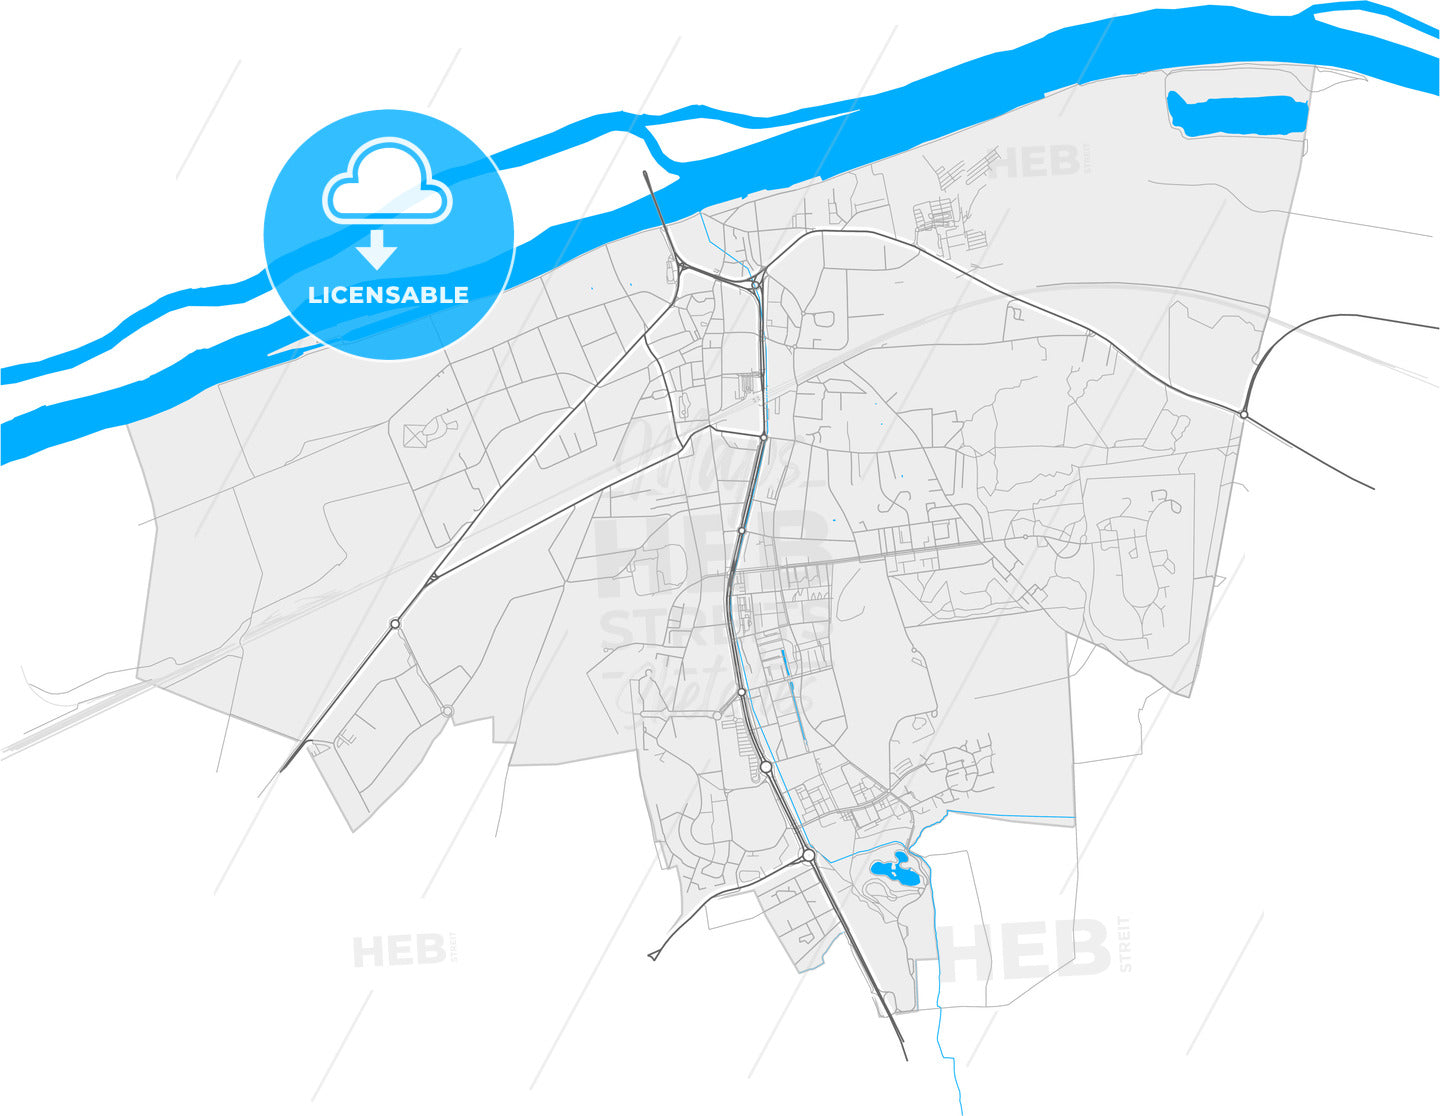 Les Mureaux, Yvelines, France, high quality vector map